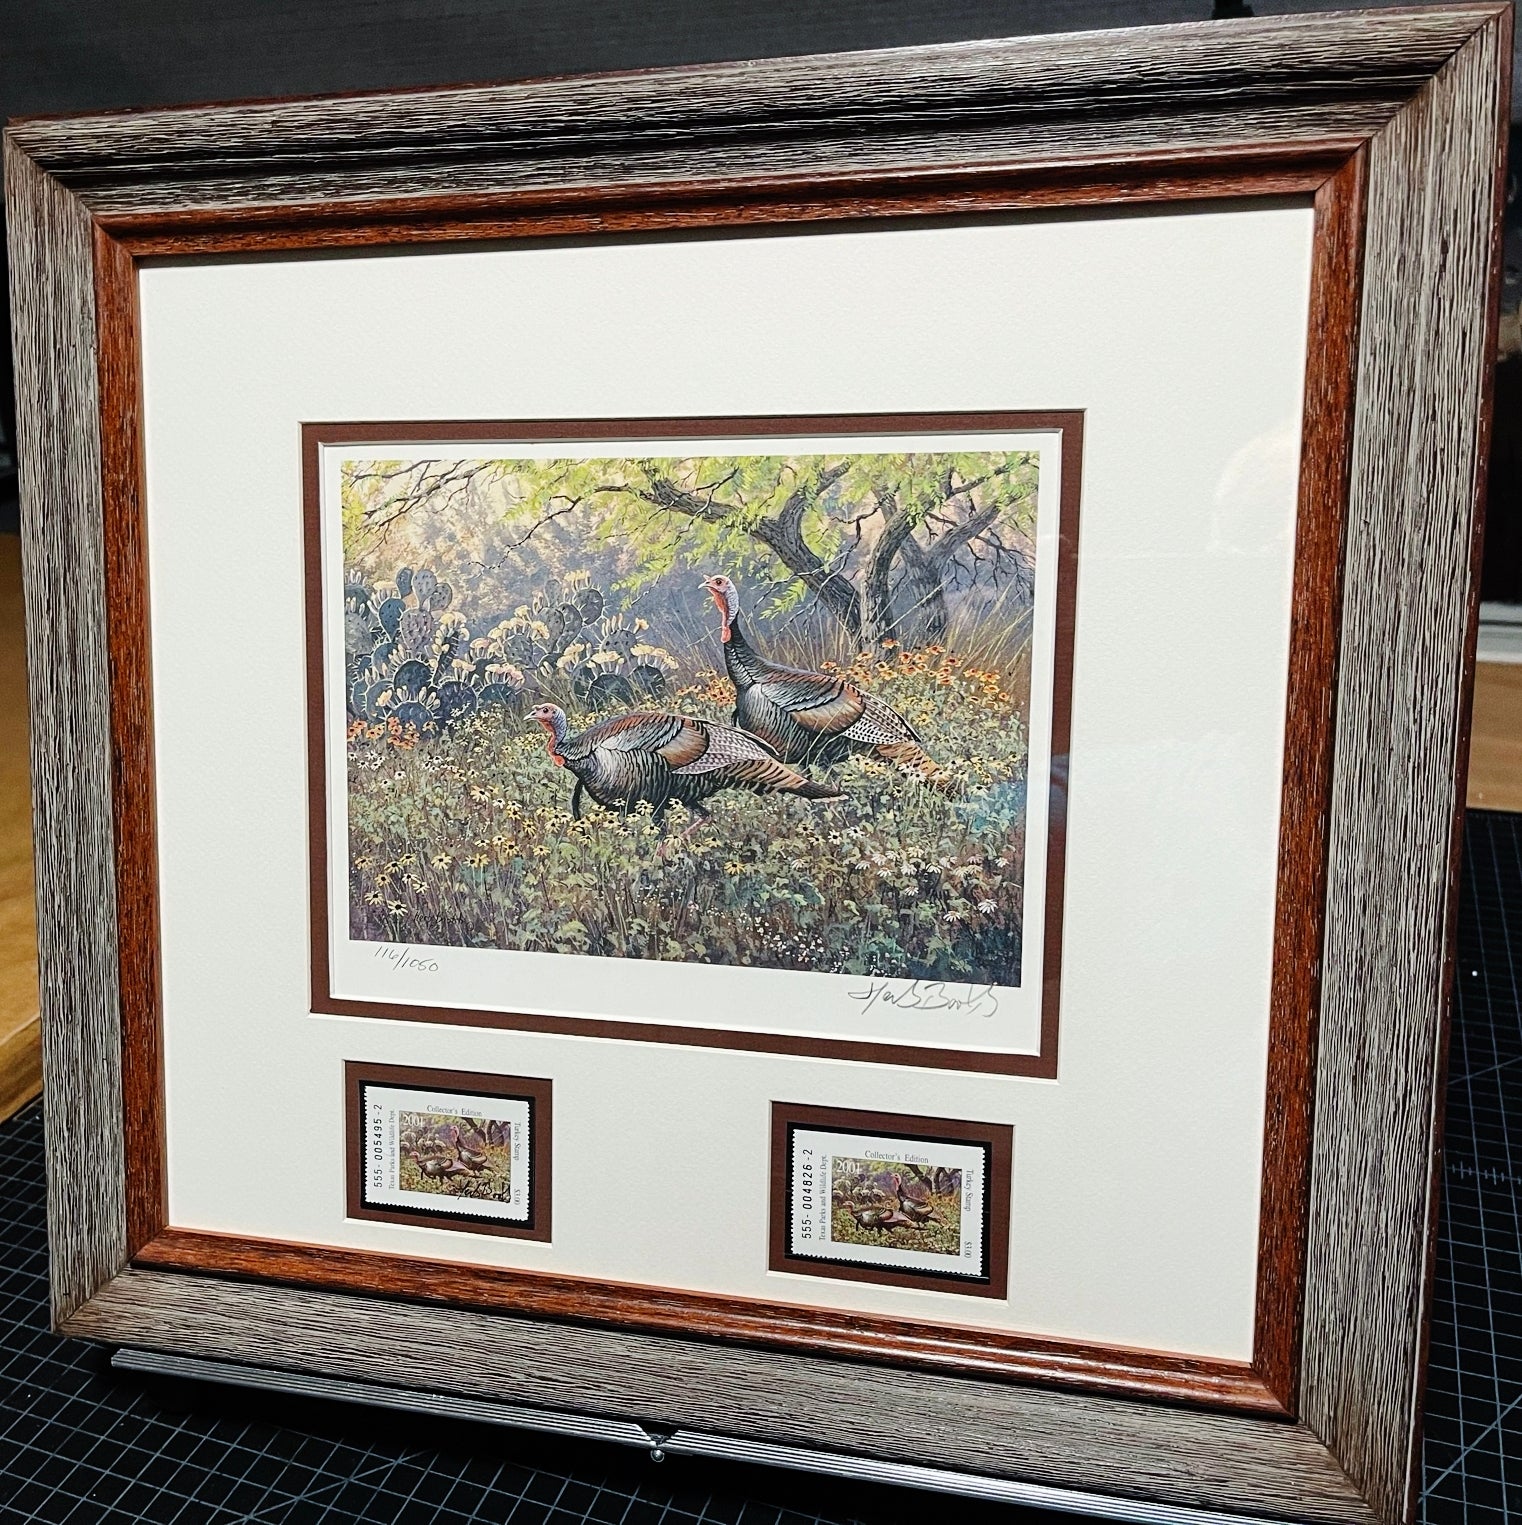 Herb Booth - 2001 Texas Turkey Stamp Print With Double Stamps - Brand New Custom Sporting Frame